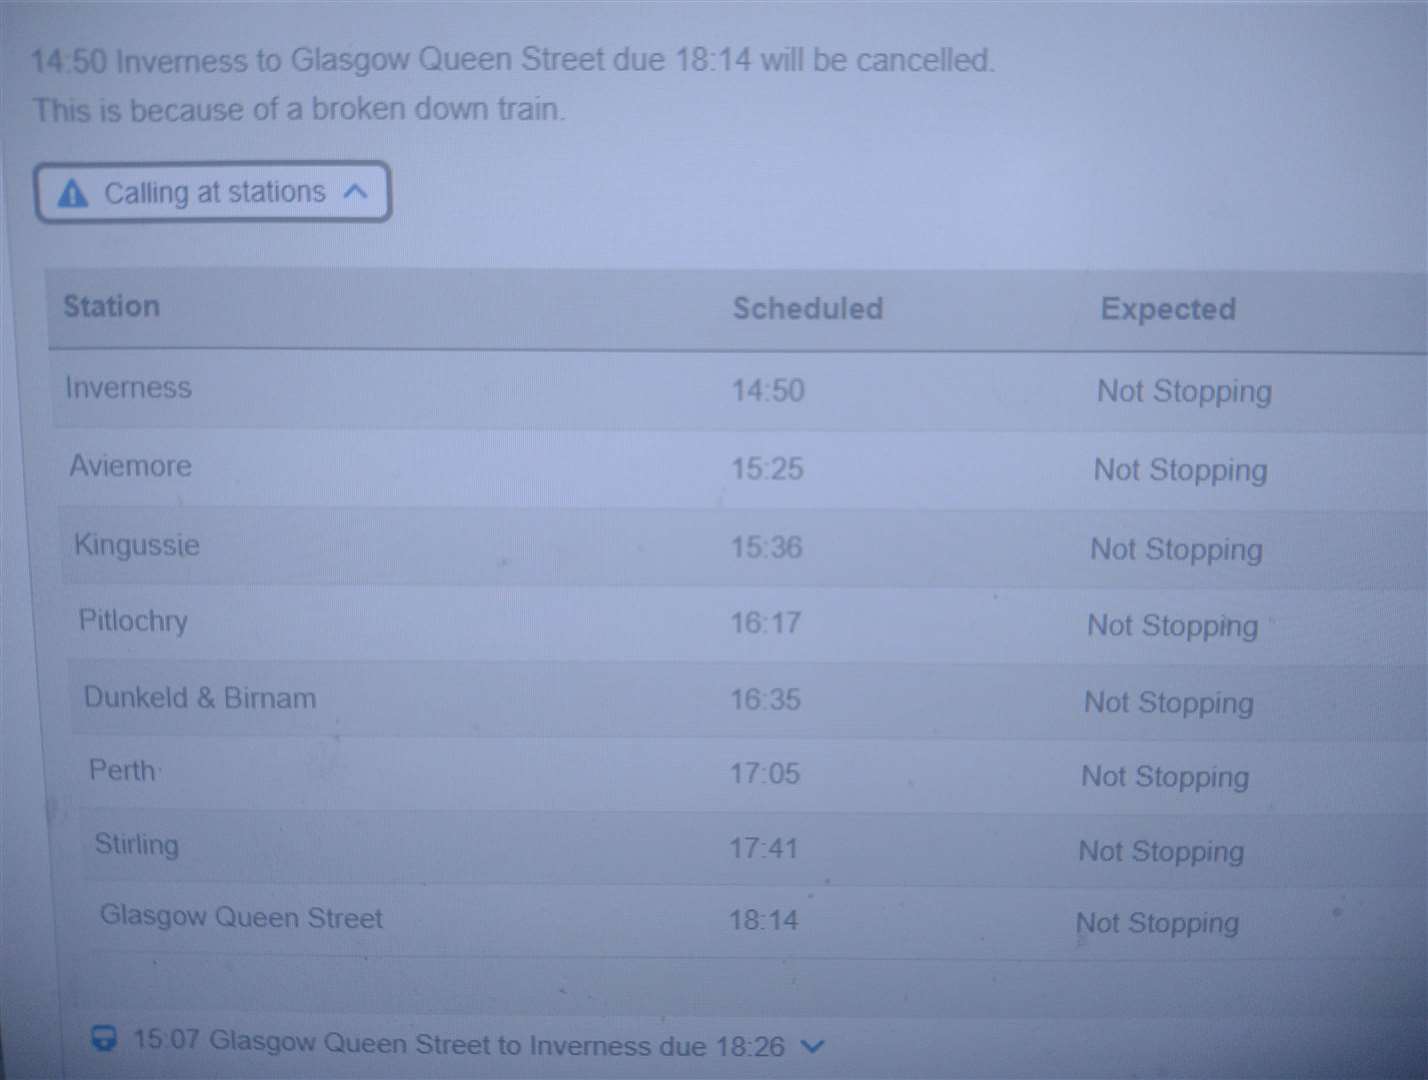 ScotRail's online notice this afternoon